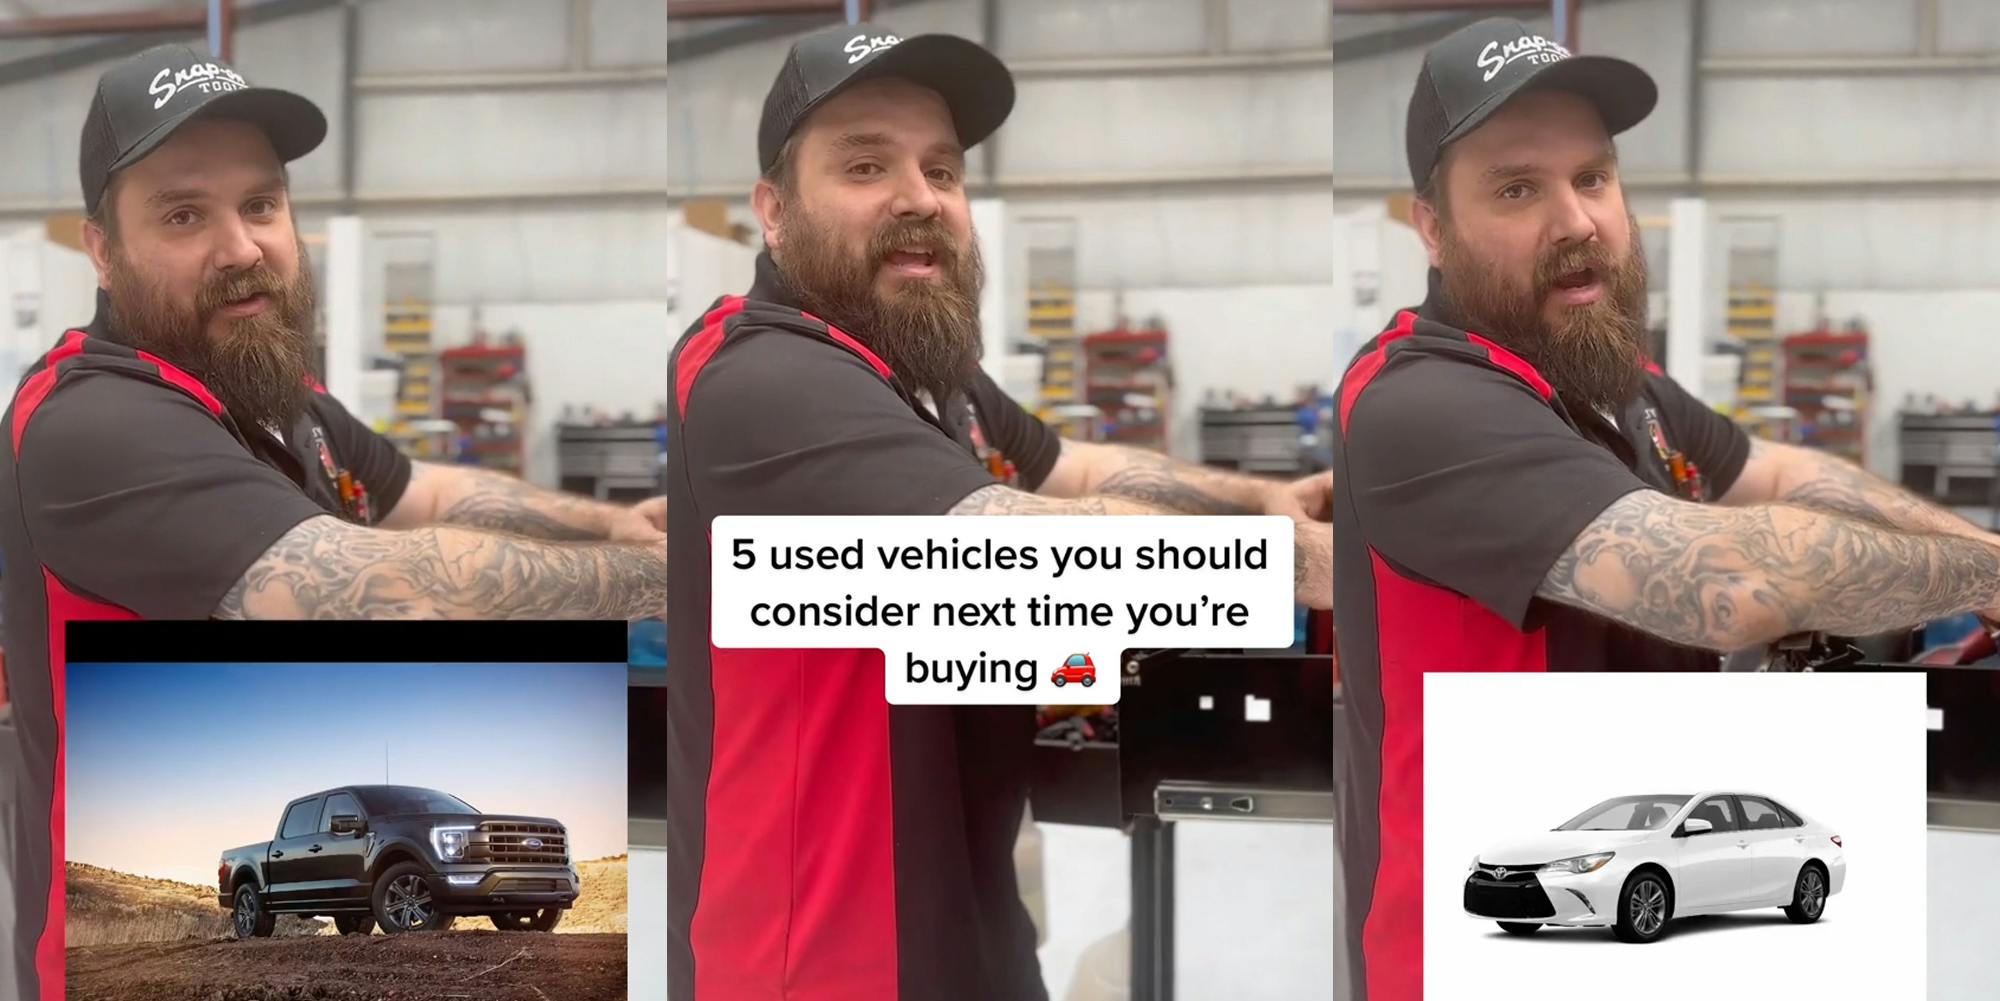 Mechanic speaking in shop with image of F150 (l) Mechanic speaking in shop with caption "5 used vehicles you should consider next time you're buying" (c) Mechanic speaking in shop with image of Toyota Camry (r)